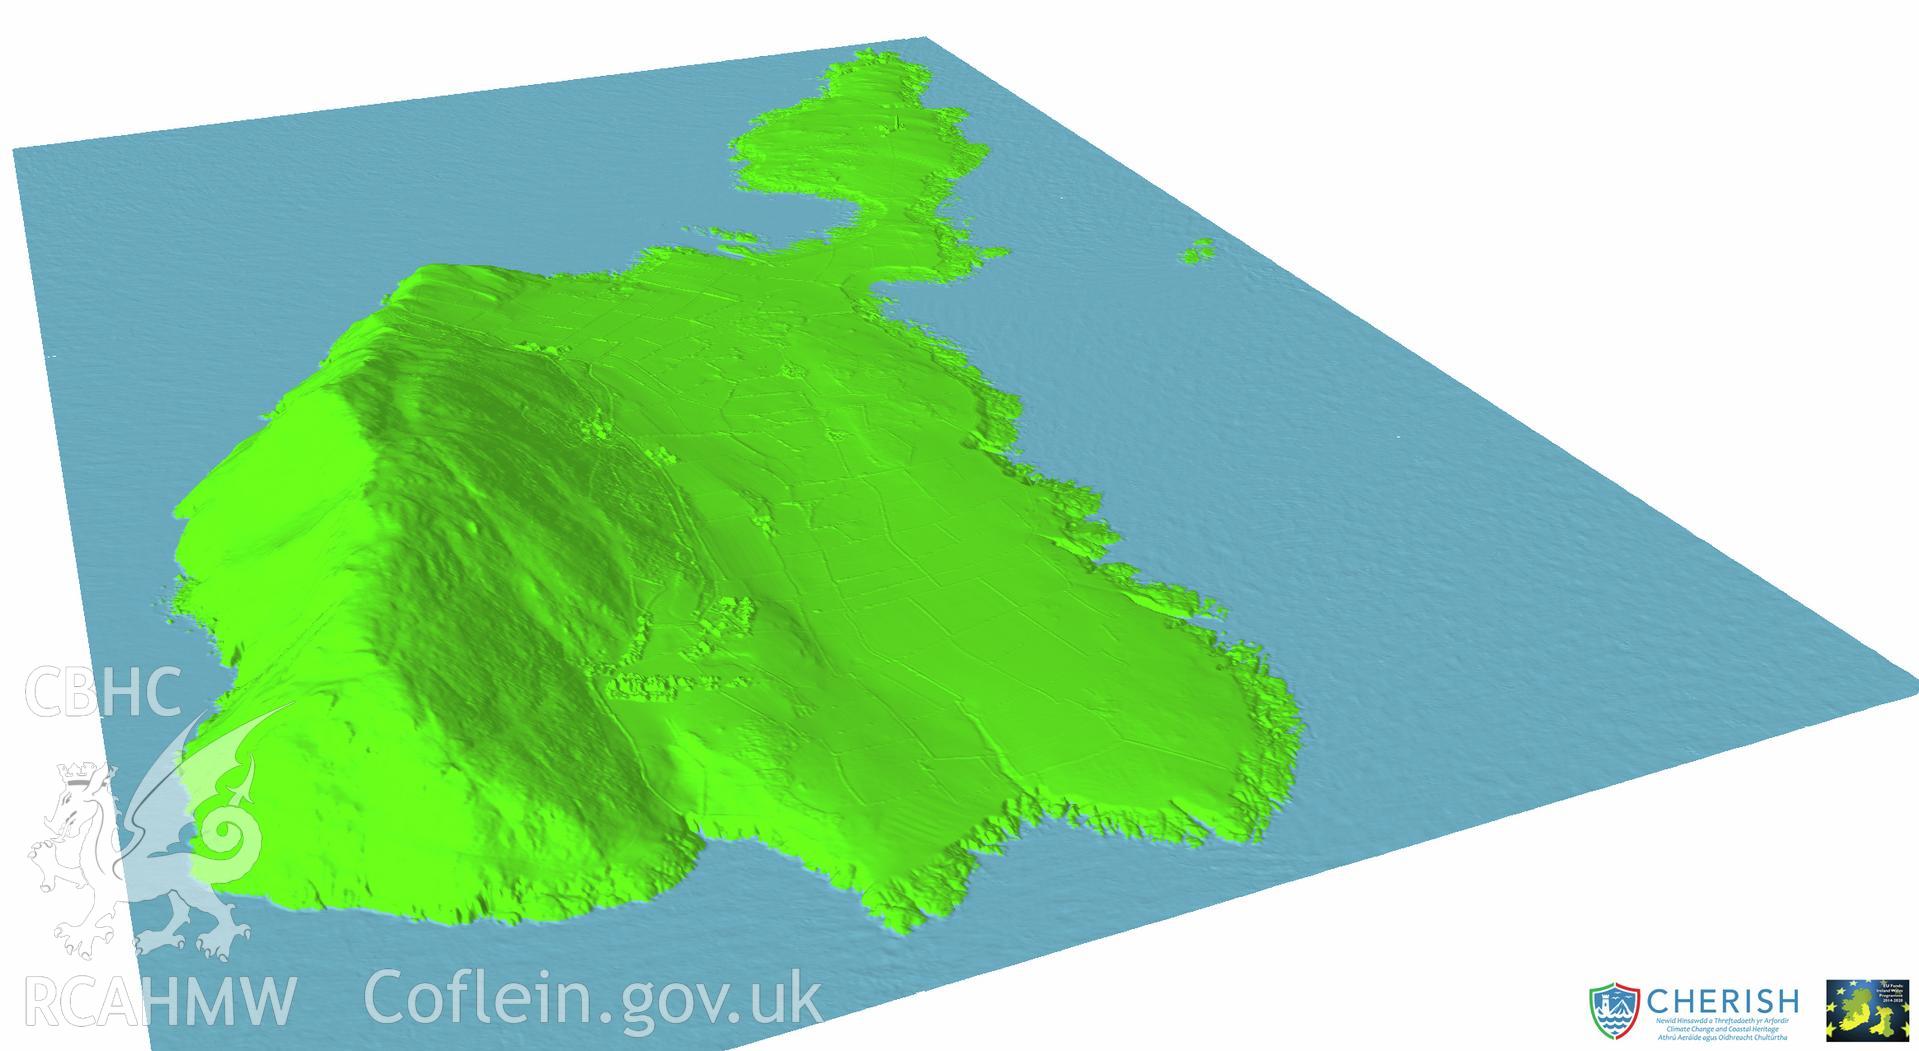 Ynys Enlli (Bardsey Island). Airborne laser scanning (LiDAR) commissioned by the CHERISH Project 2017-2021, flown by Bluesky International LTD at low tide on 24th February 2017. View showing Bardsey Island from the south-west.